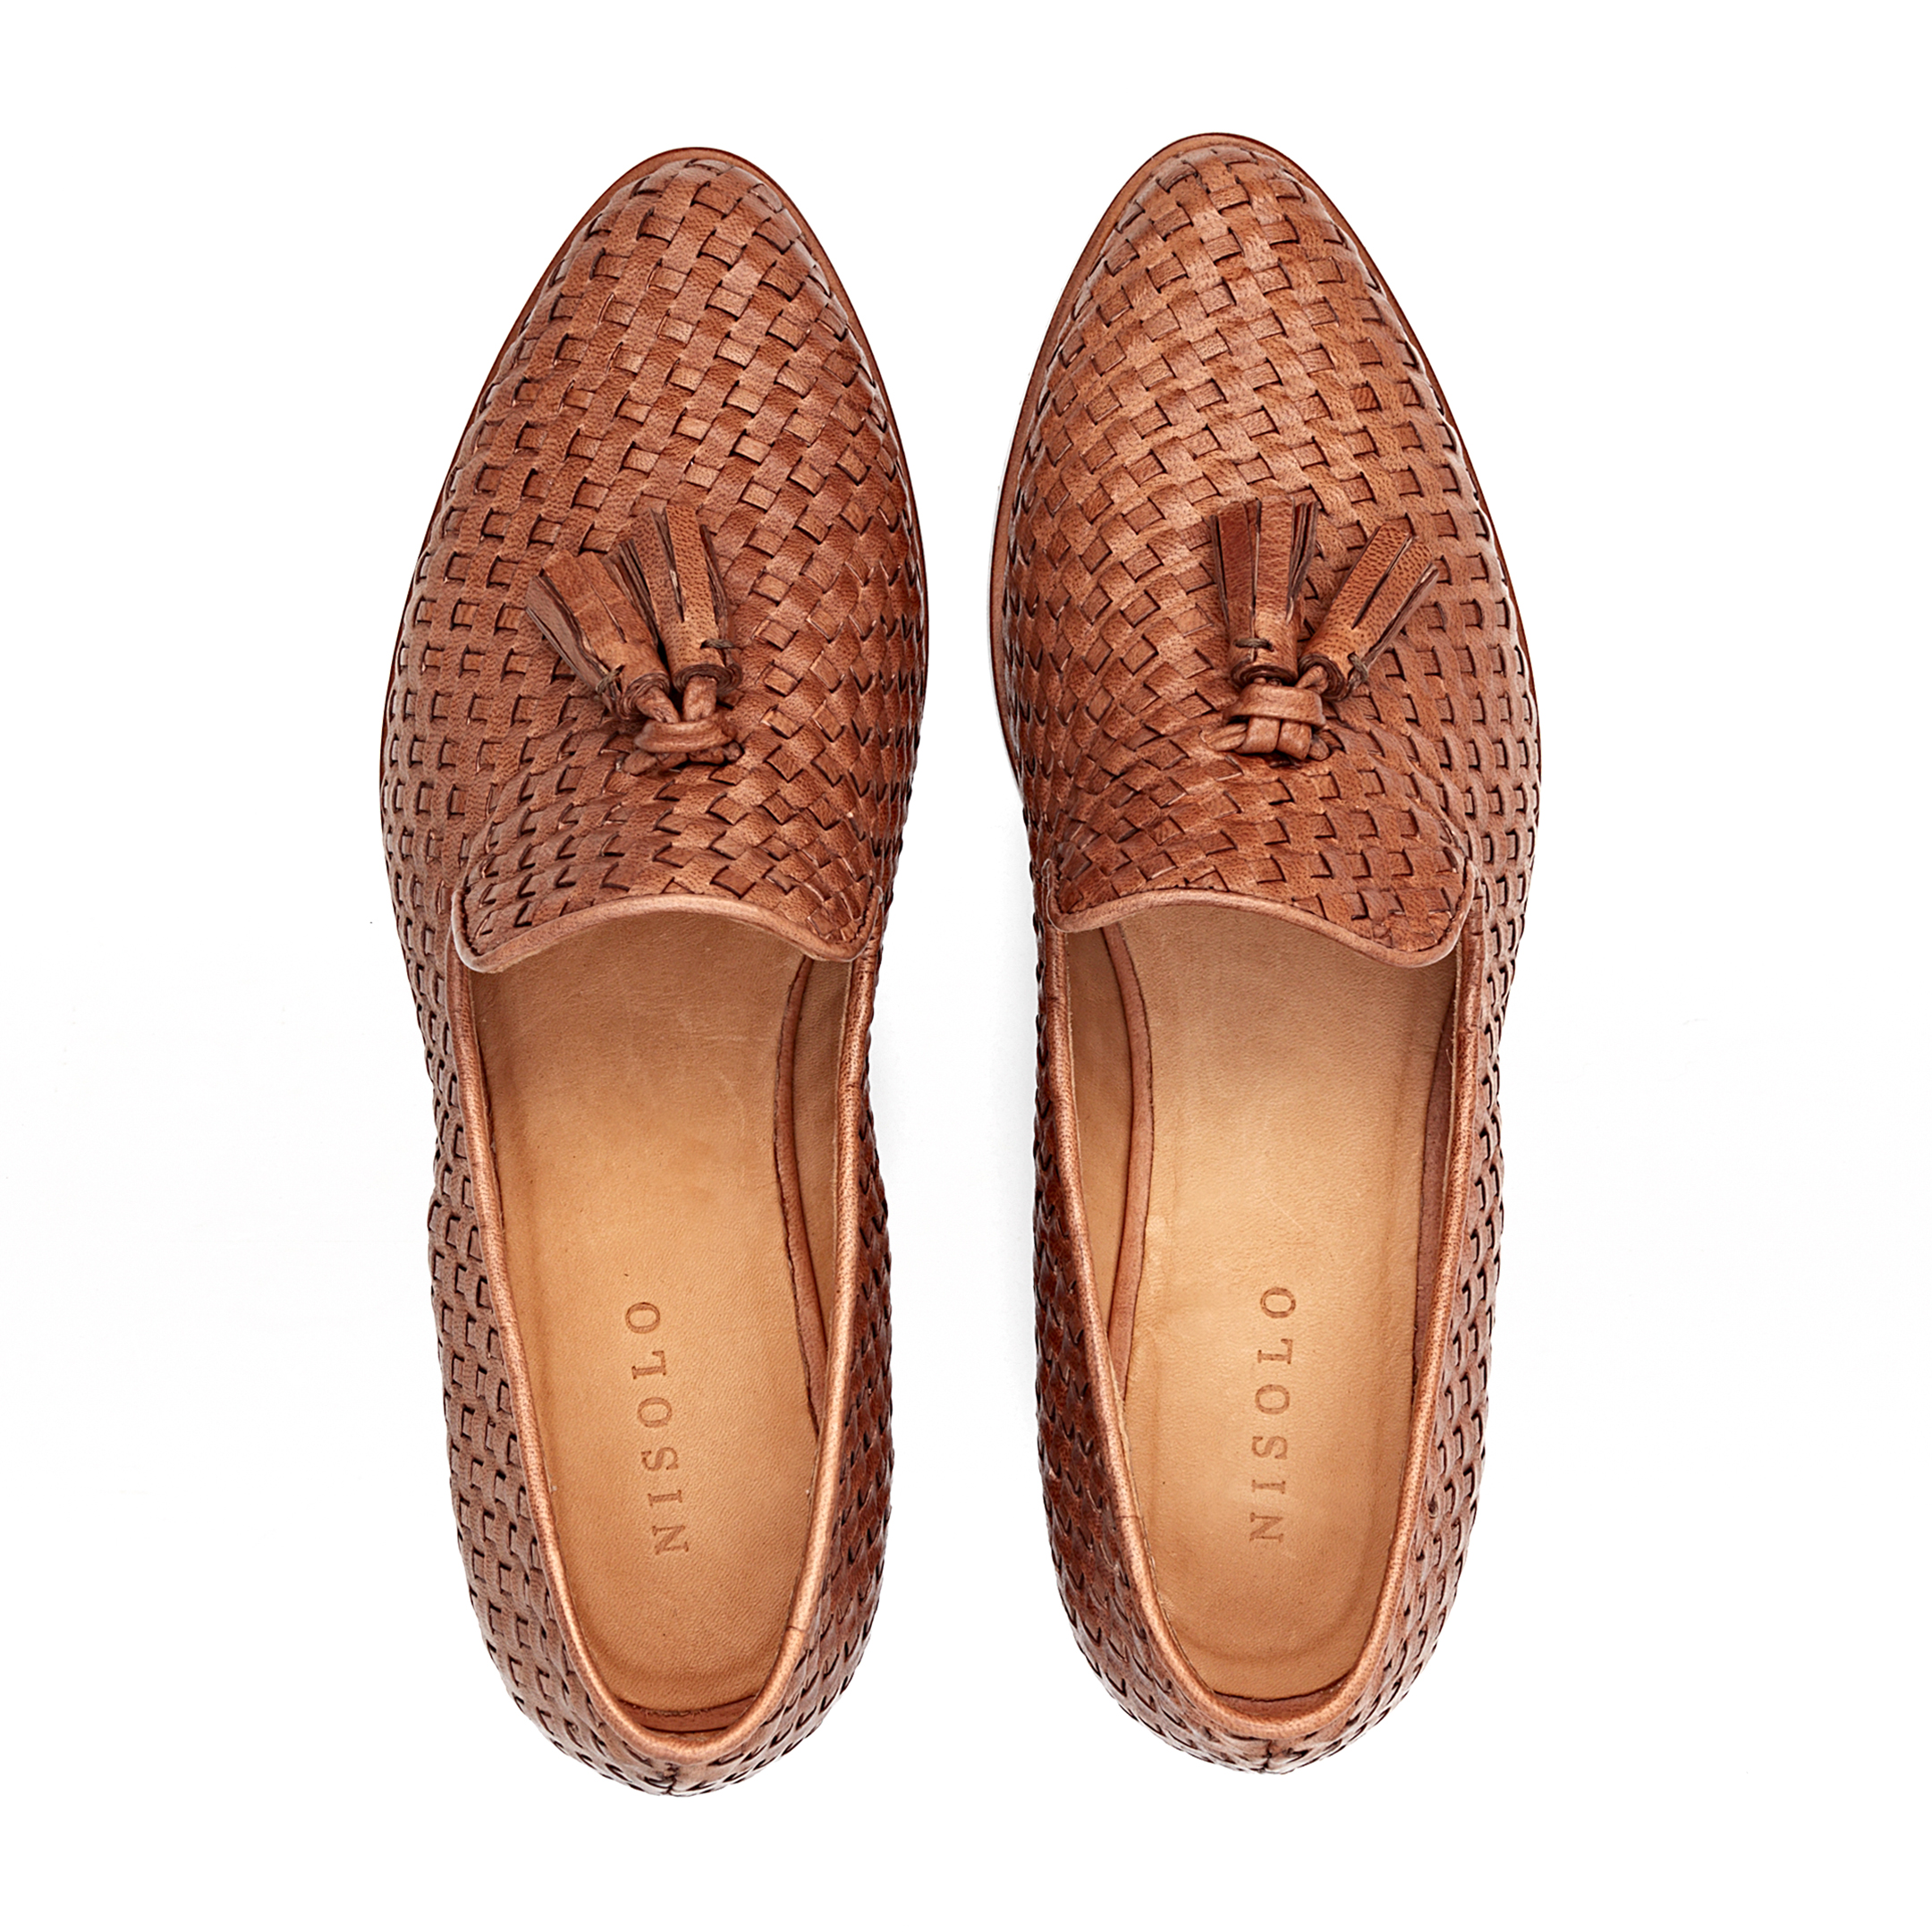 woven loafers womens